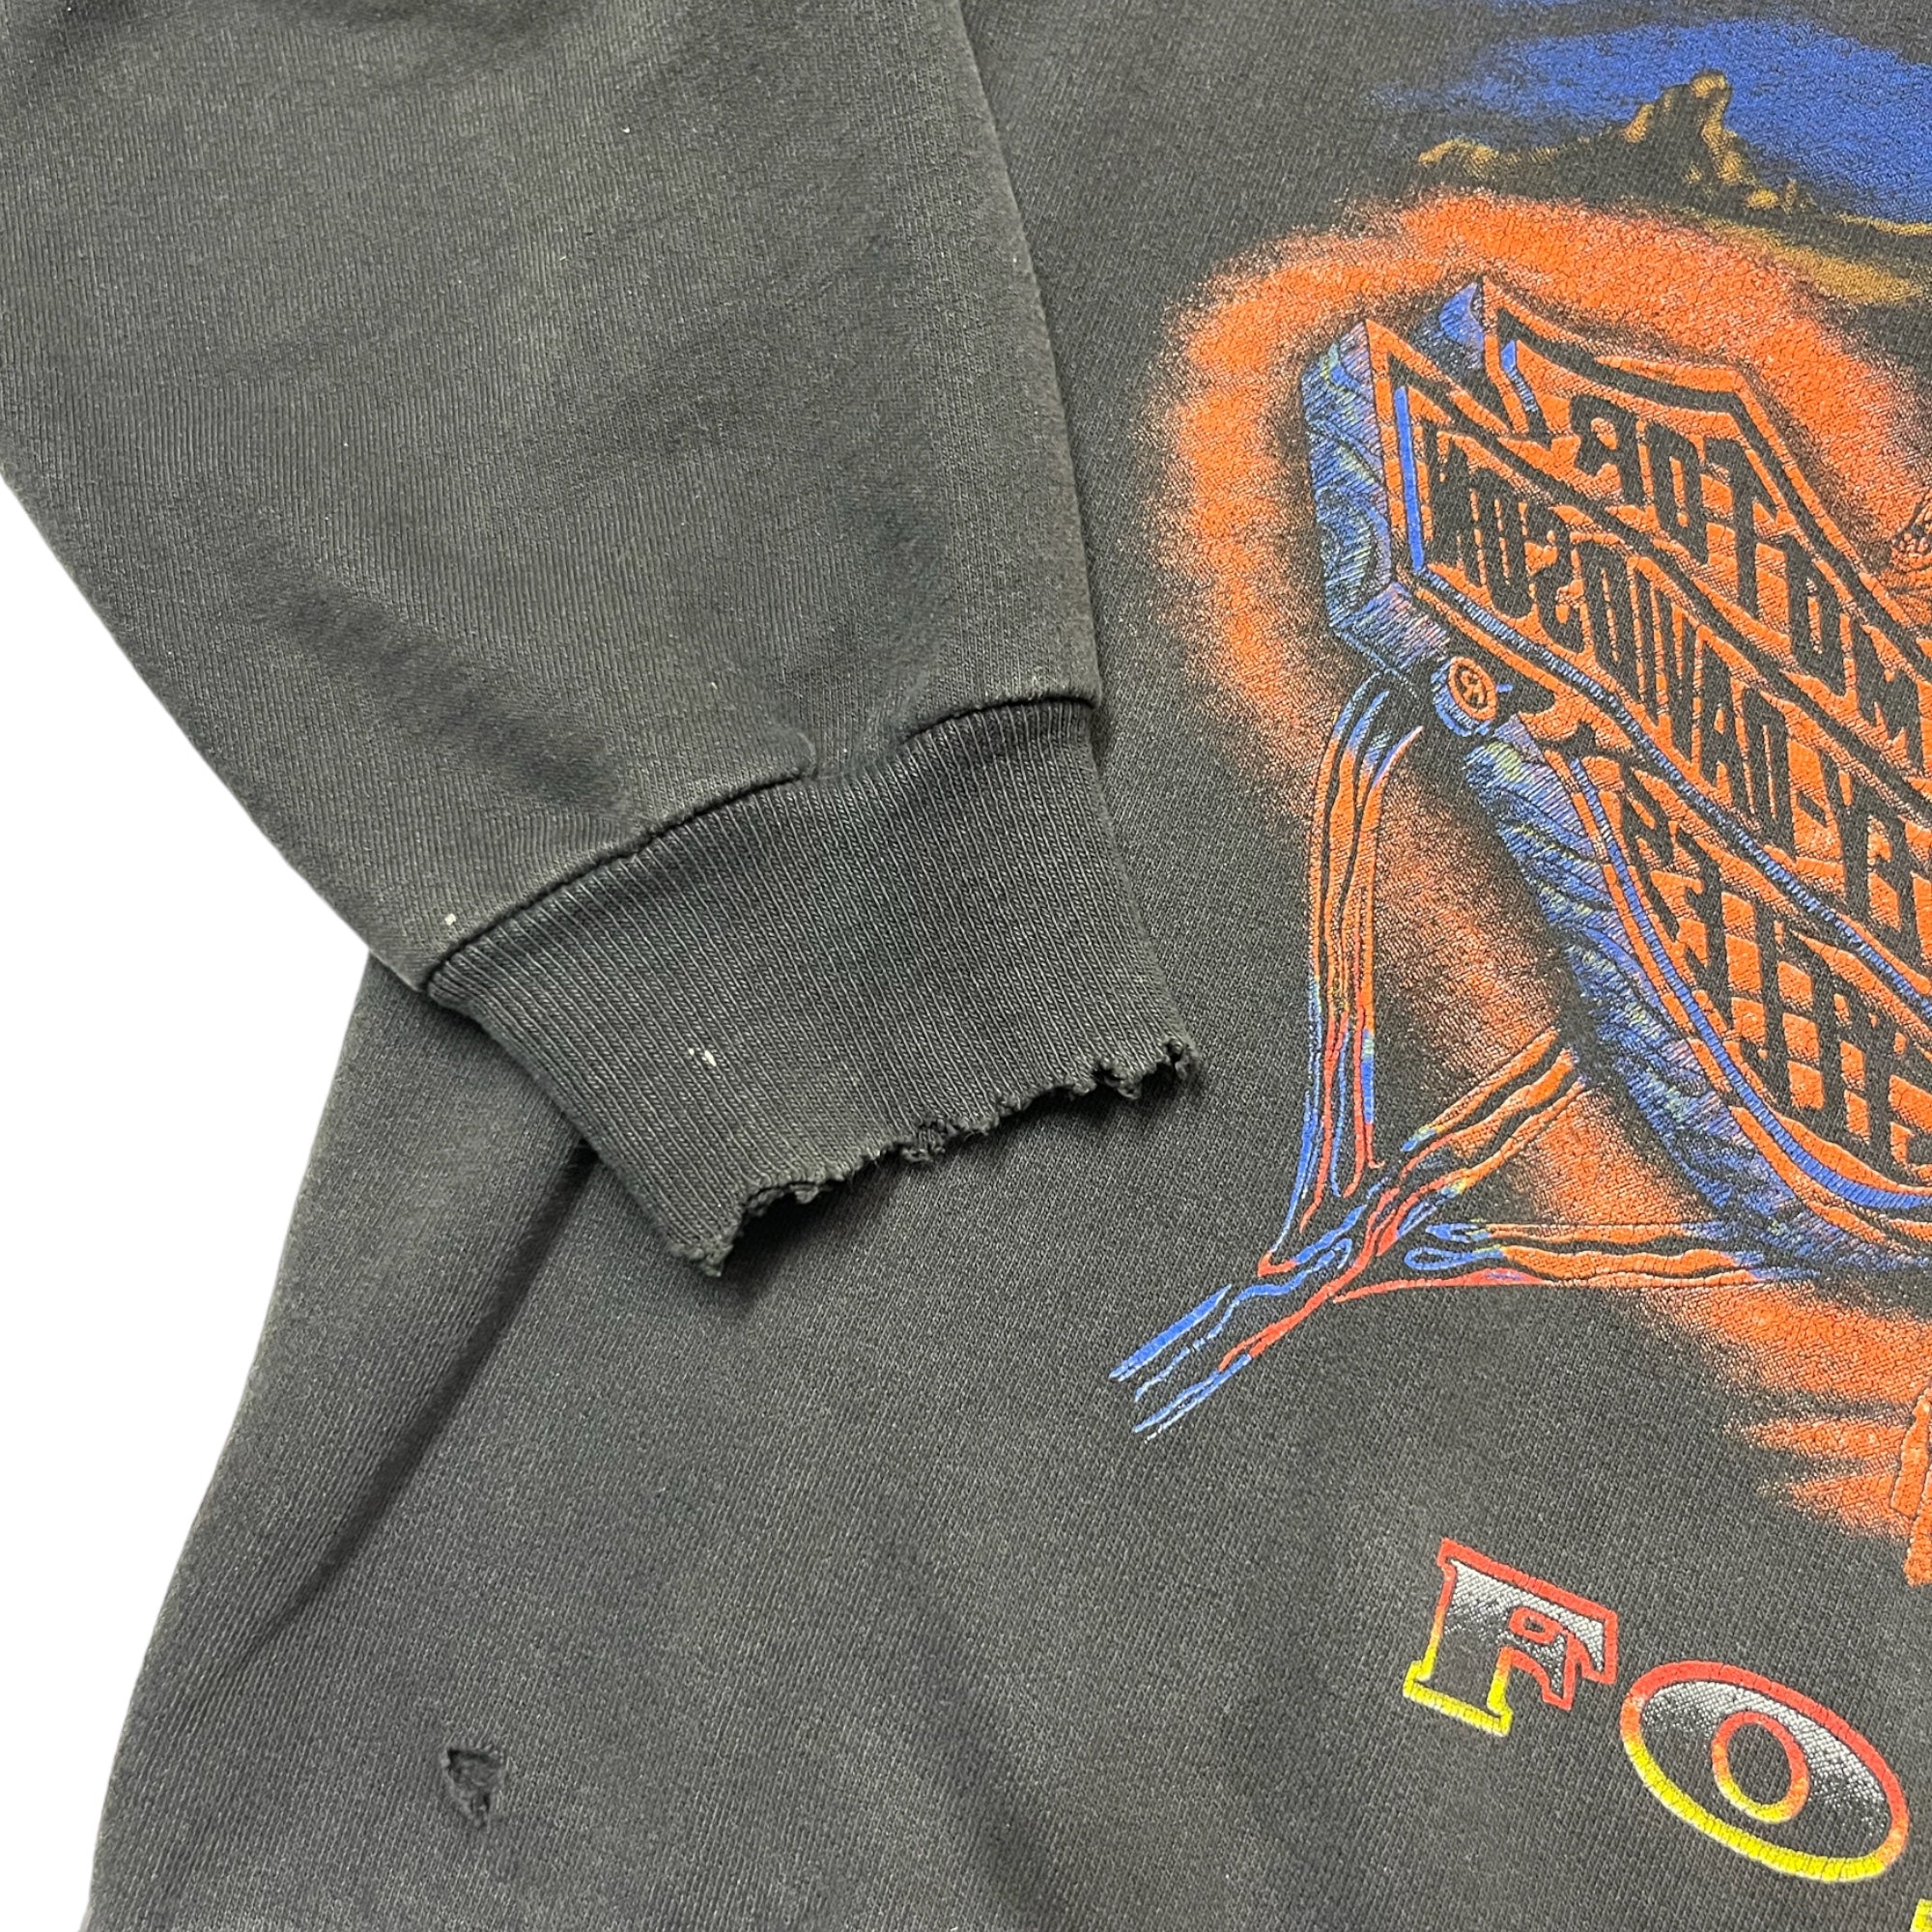 1980s Made in USA Distressed Harley-Davidson ‘One Brand For Life’ Graphic Crewneck Sweatshirt - Faded Black - S